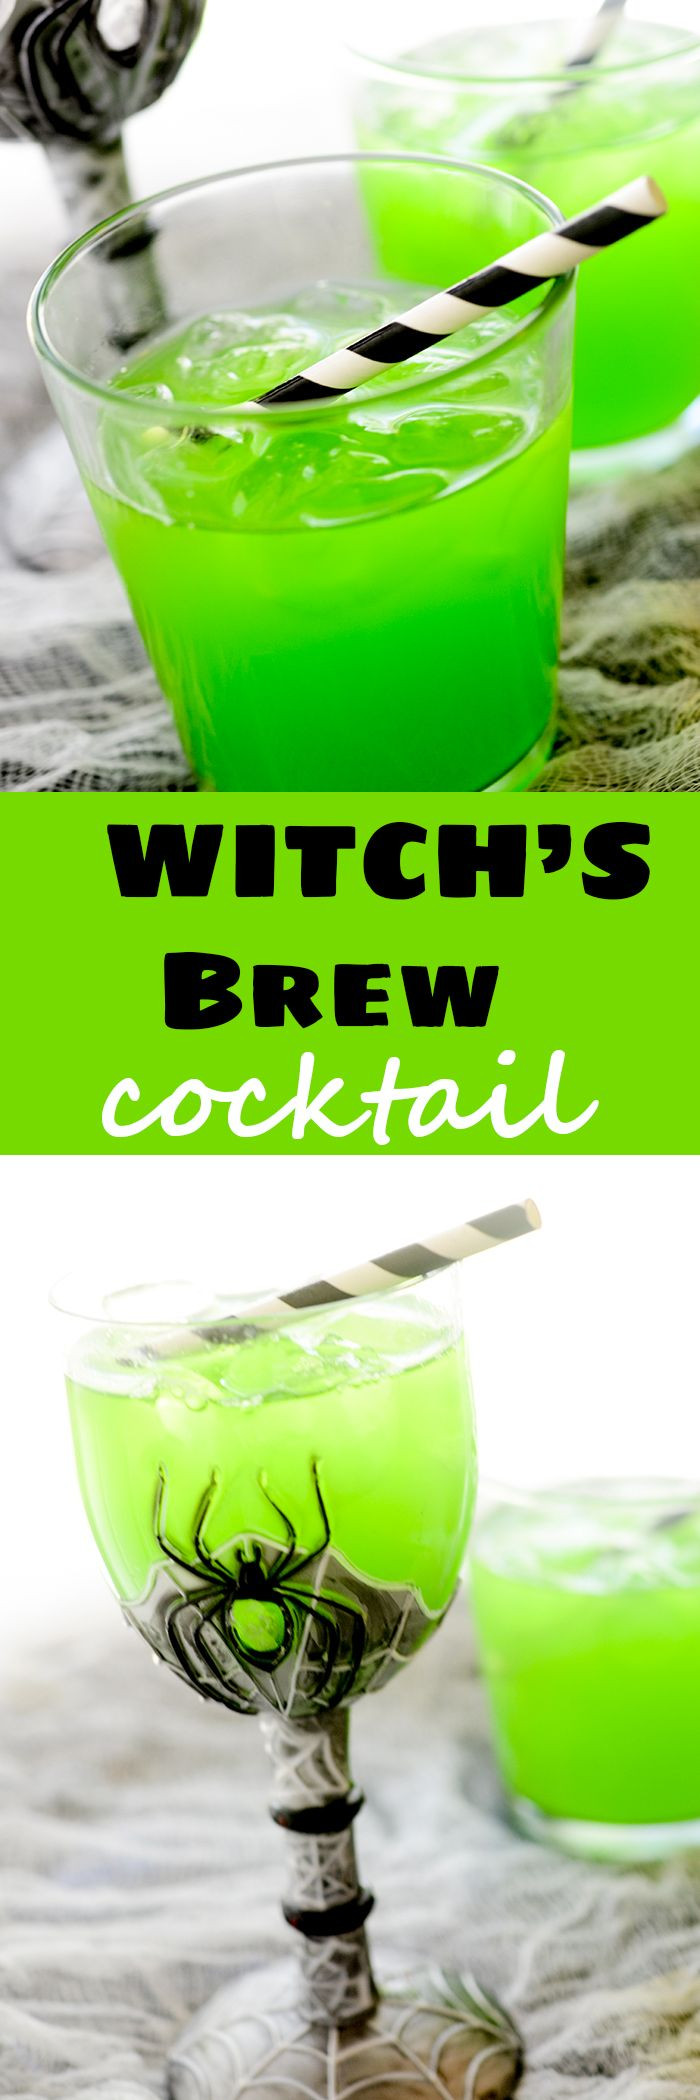 Halloween Party Drink Ideas For Adults
 Witch s Brew Cocktail Recipe Halloween